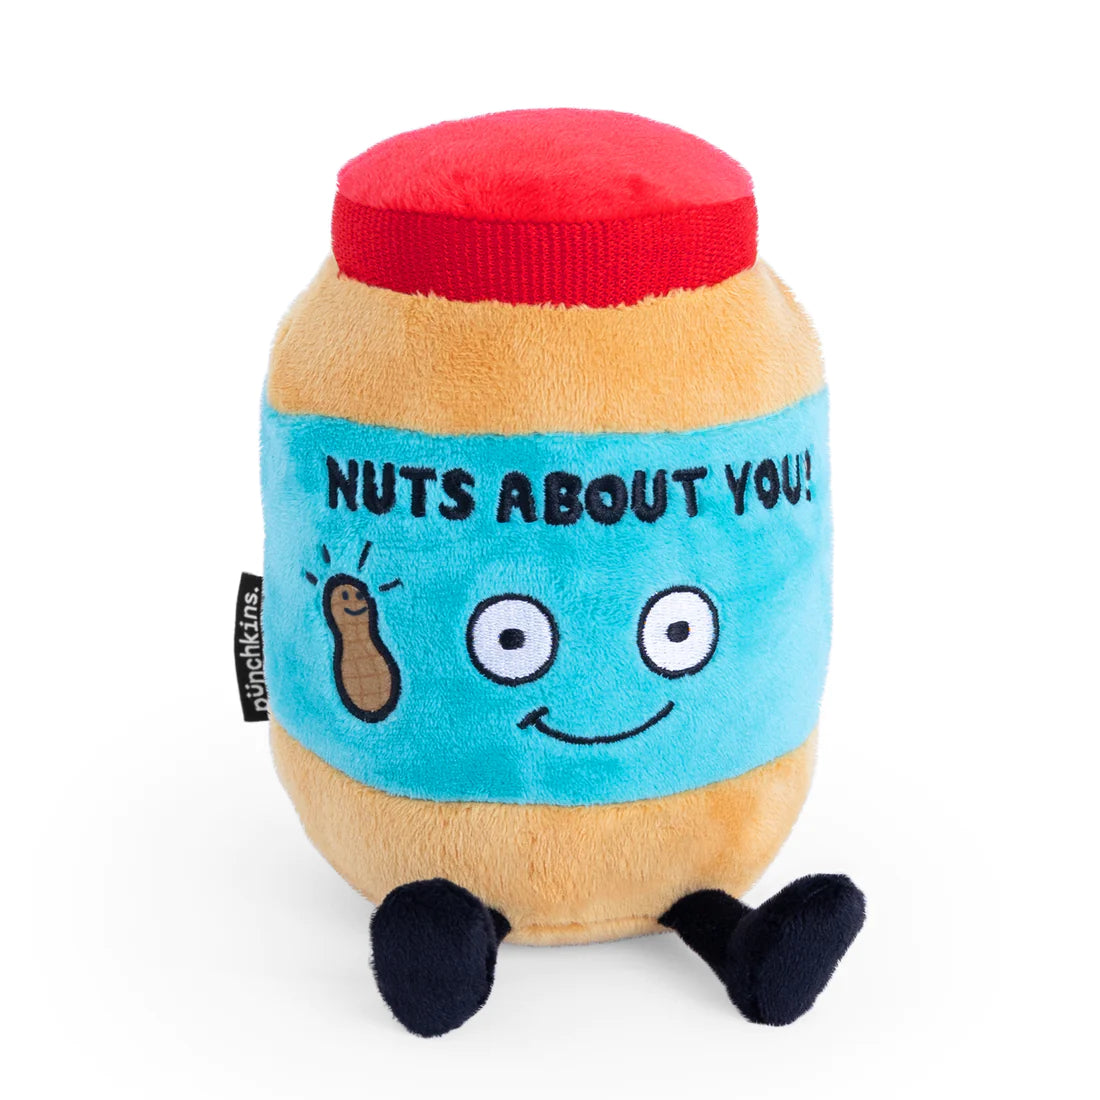 Punchkins - "Nuts About You" Plush Peanut Butter Jar Punchkins Punchkins    | Red Claw Gaming